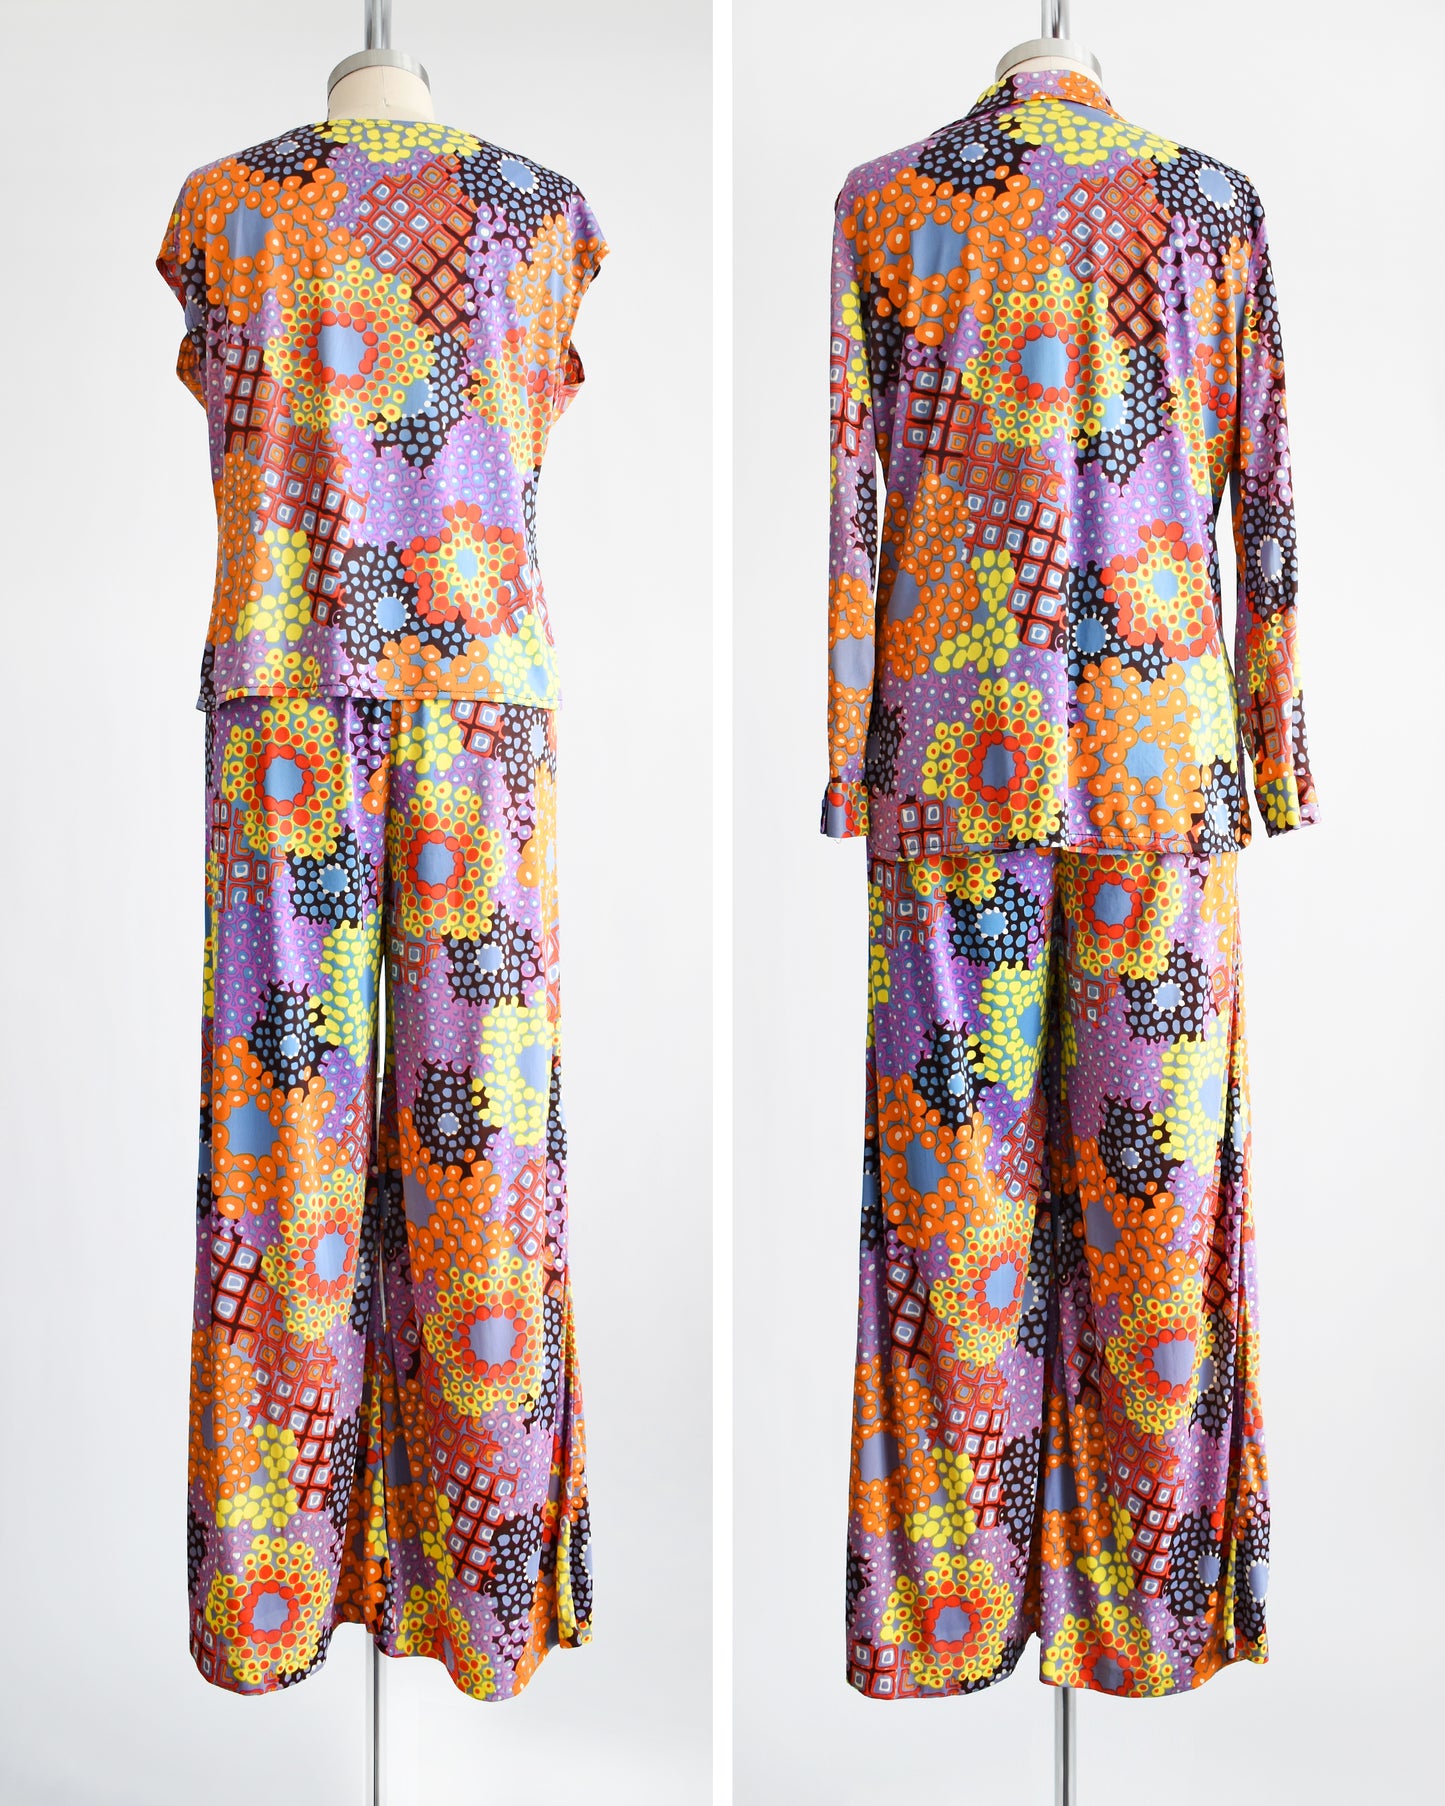 Side by side back views of a vibrant vintage 1970 mod floral pantsuit three piece set. The left side shows the set without the long sleeve blouse